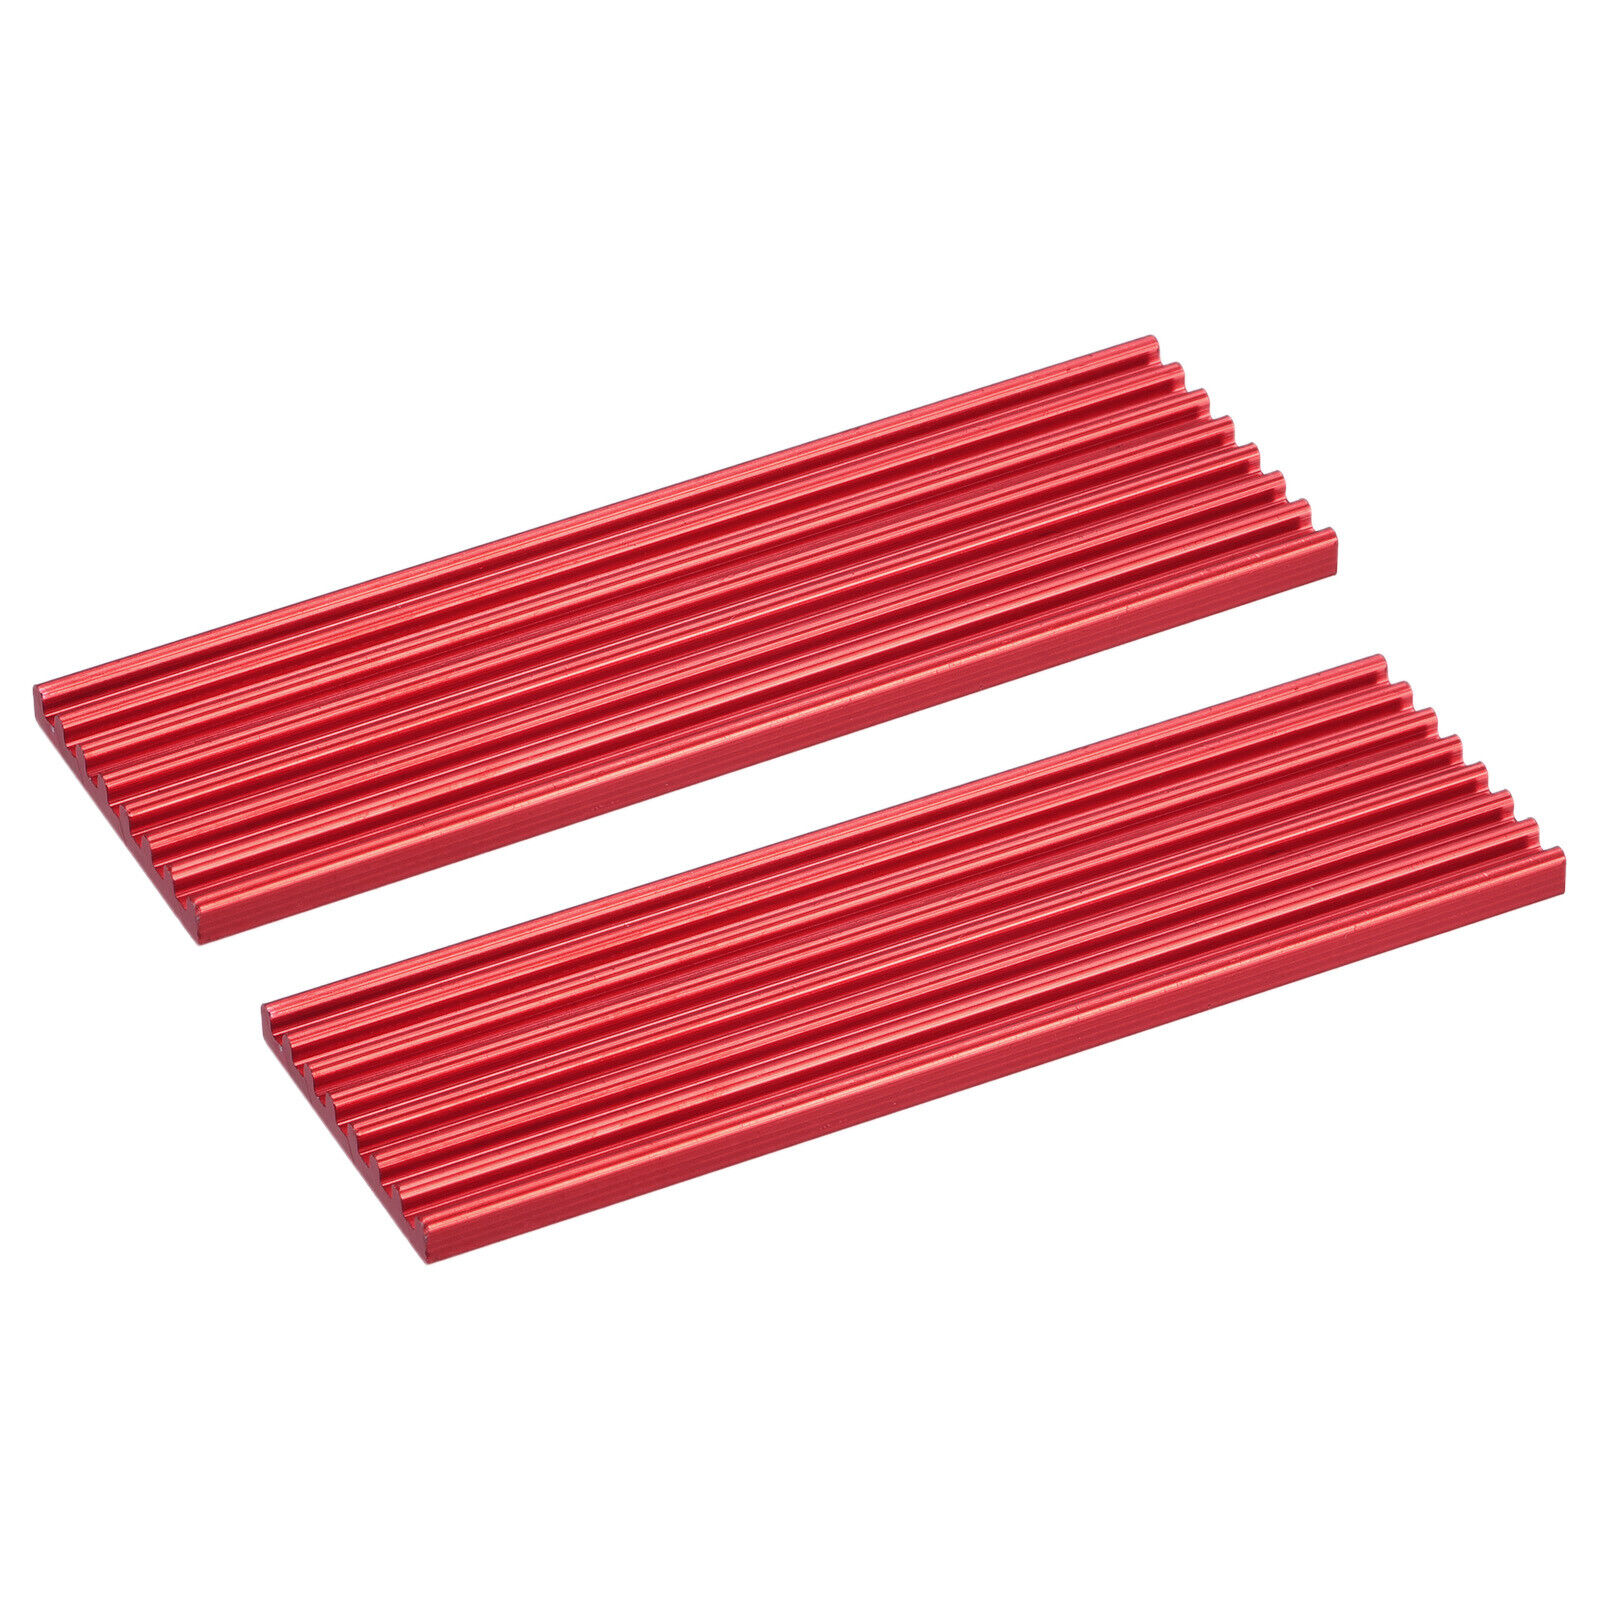 2Pcs M.2 2280 Nvme SSD Heatsink Cooler with Thermal Pad 70x22x3mm, Red